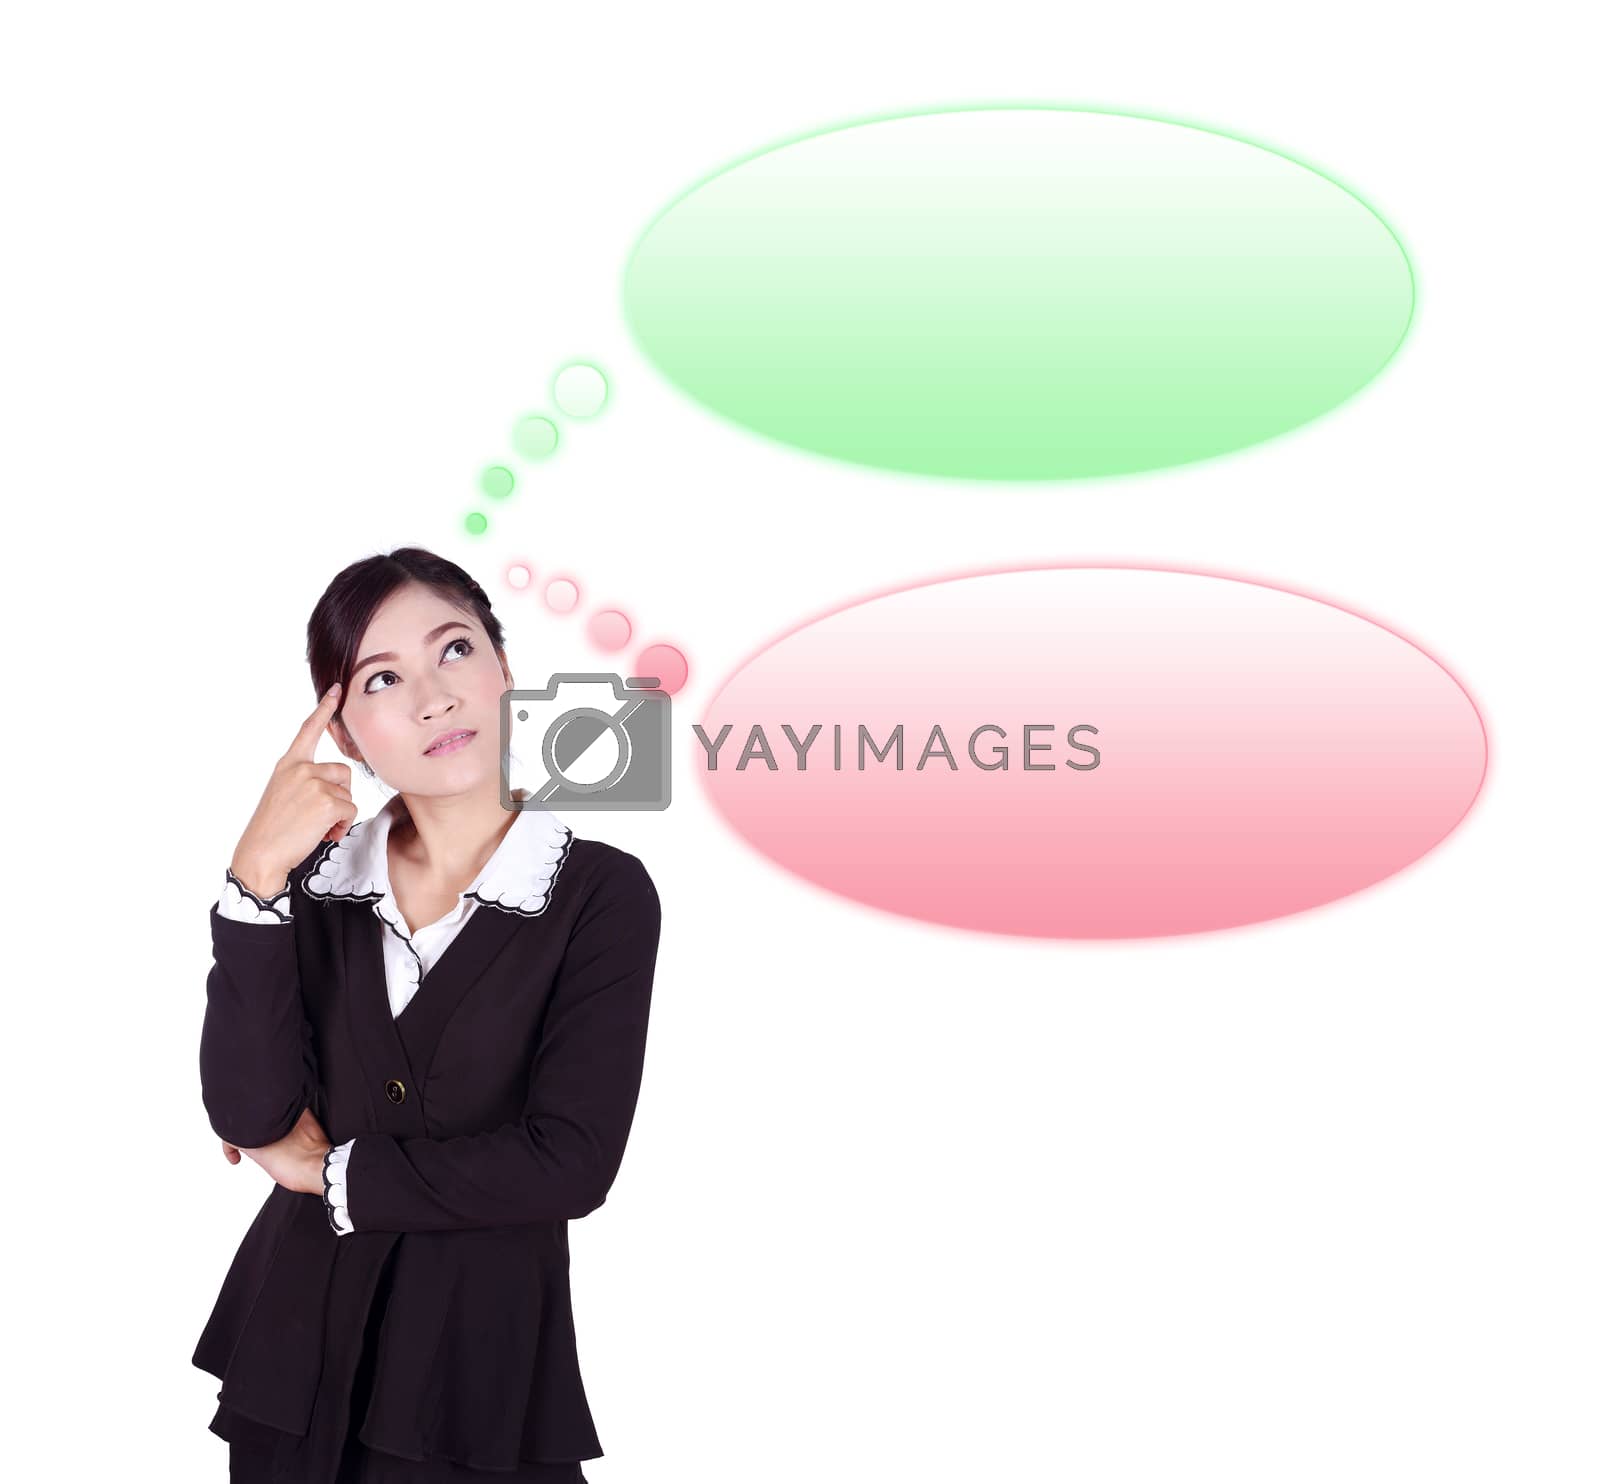 Royalty free image of thinking business woman looking up on speech empty bubble by geargodz